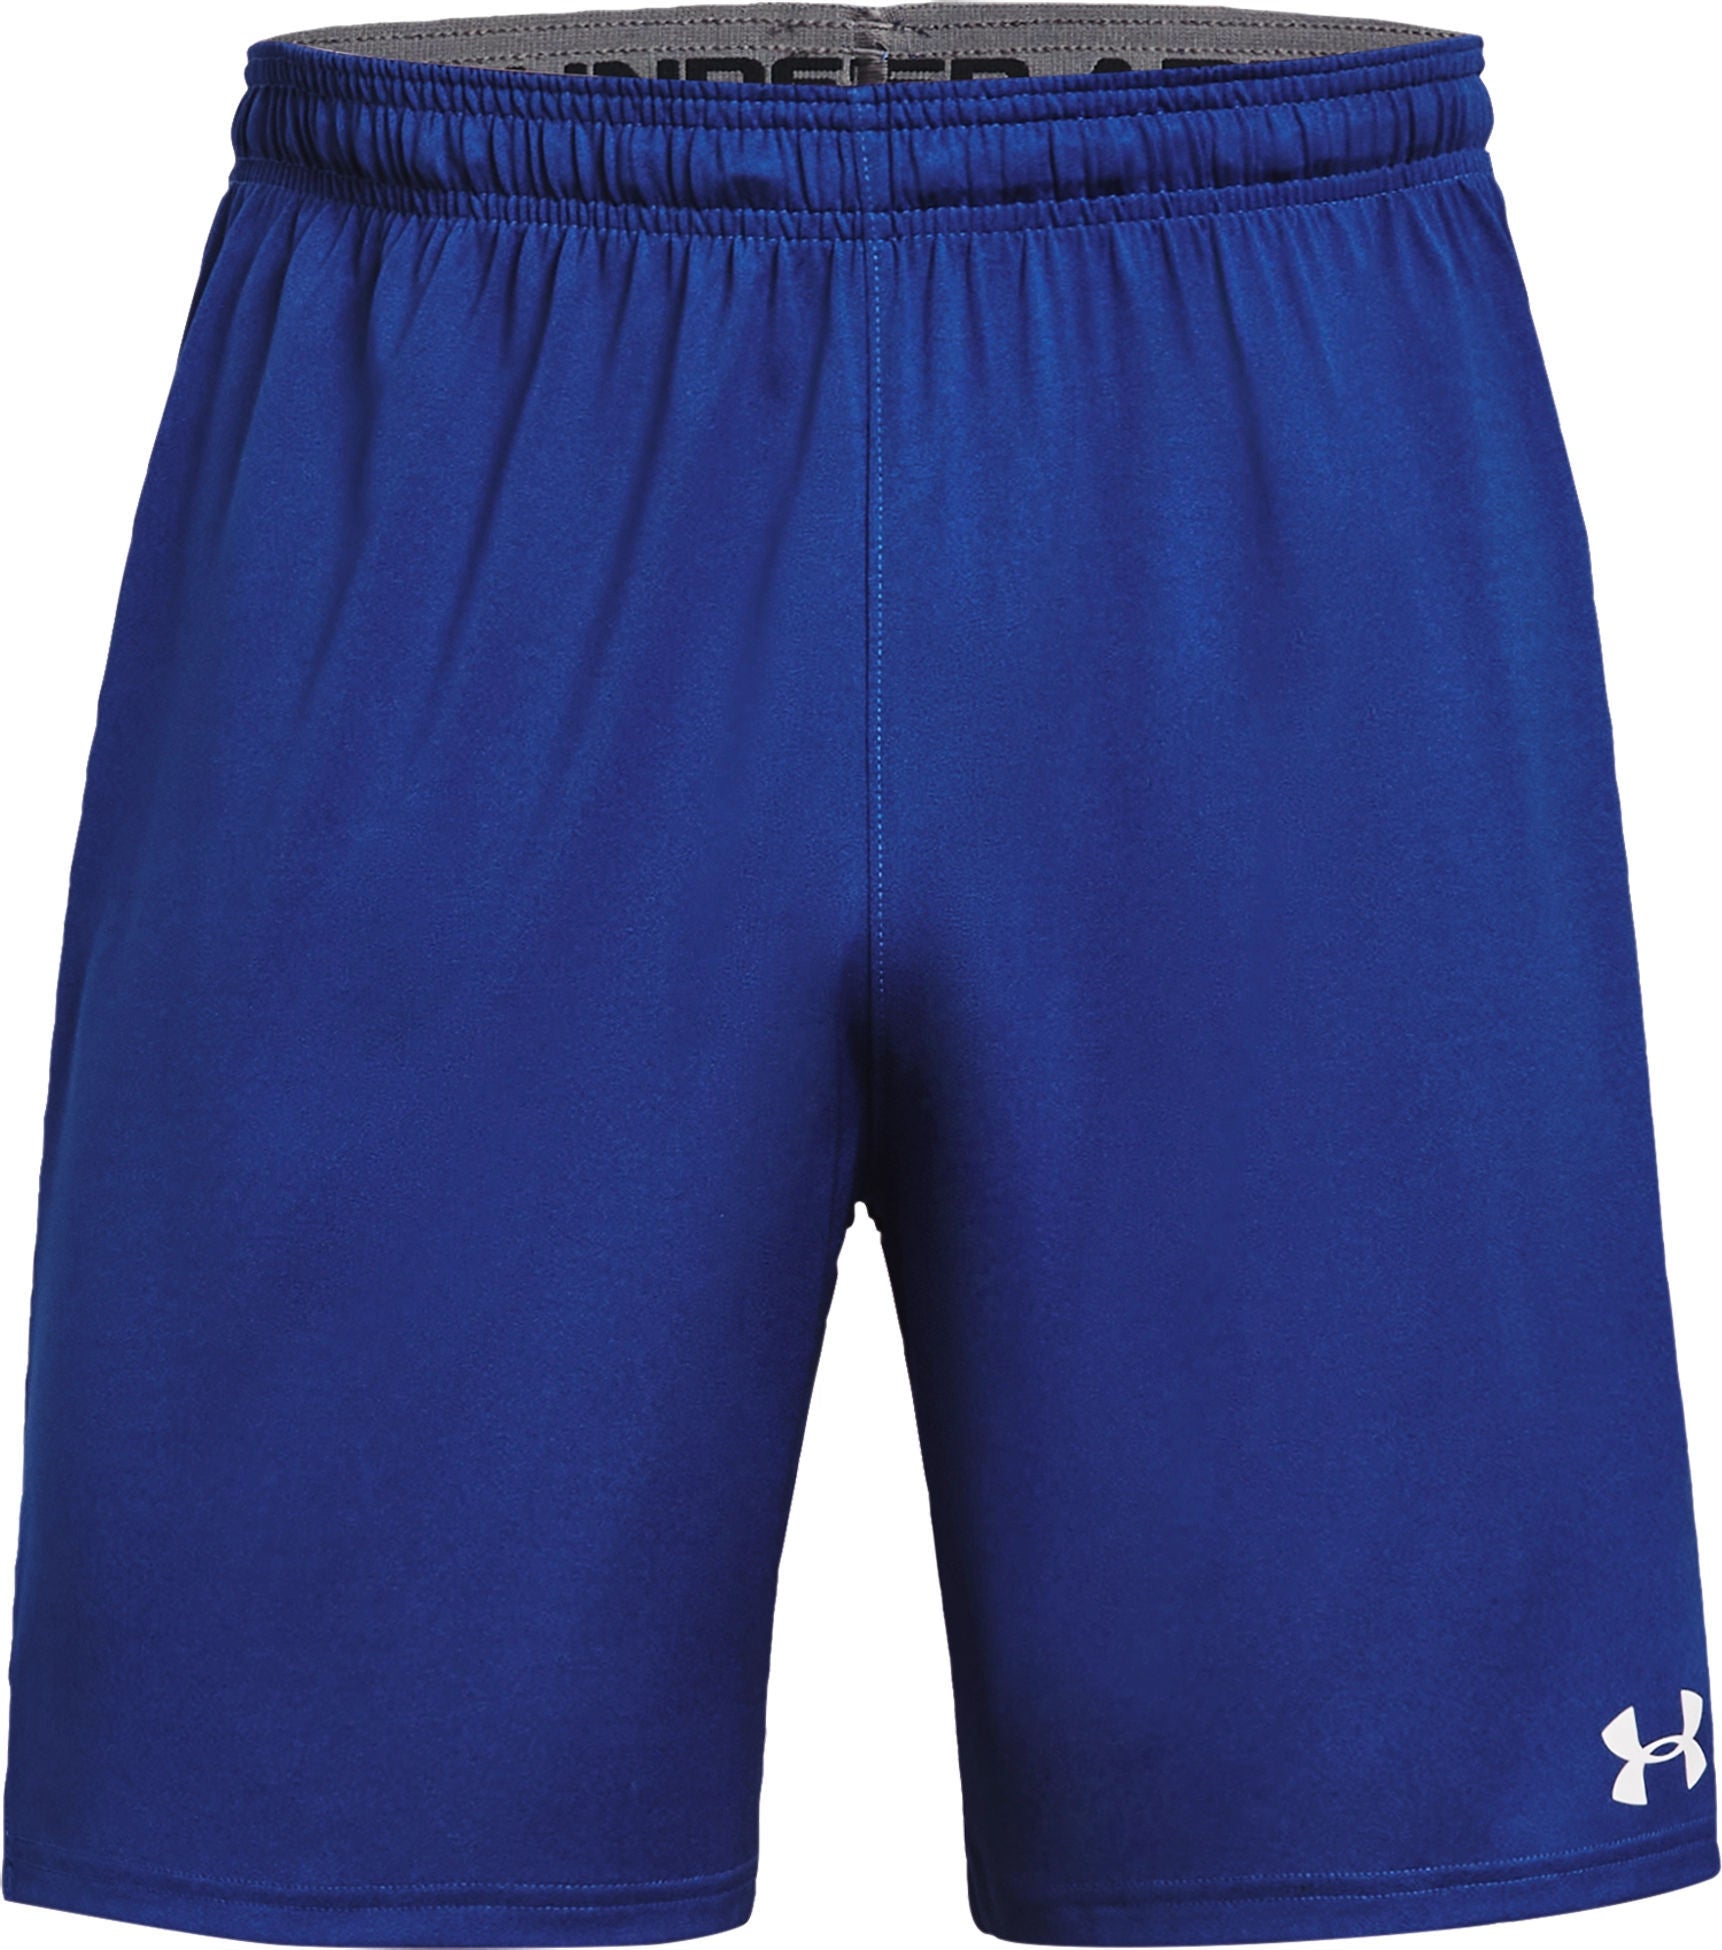 Under Armour Mens Rival Fleece Shorts, (001) Black / / White, X-Small at   Men's Clothing store